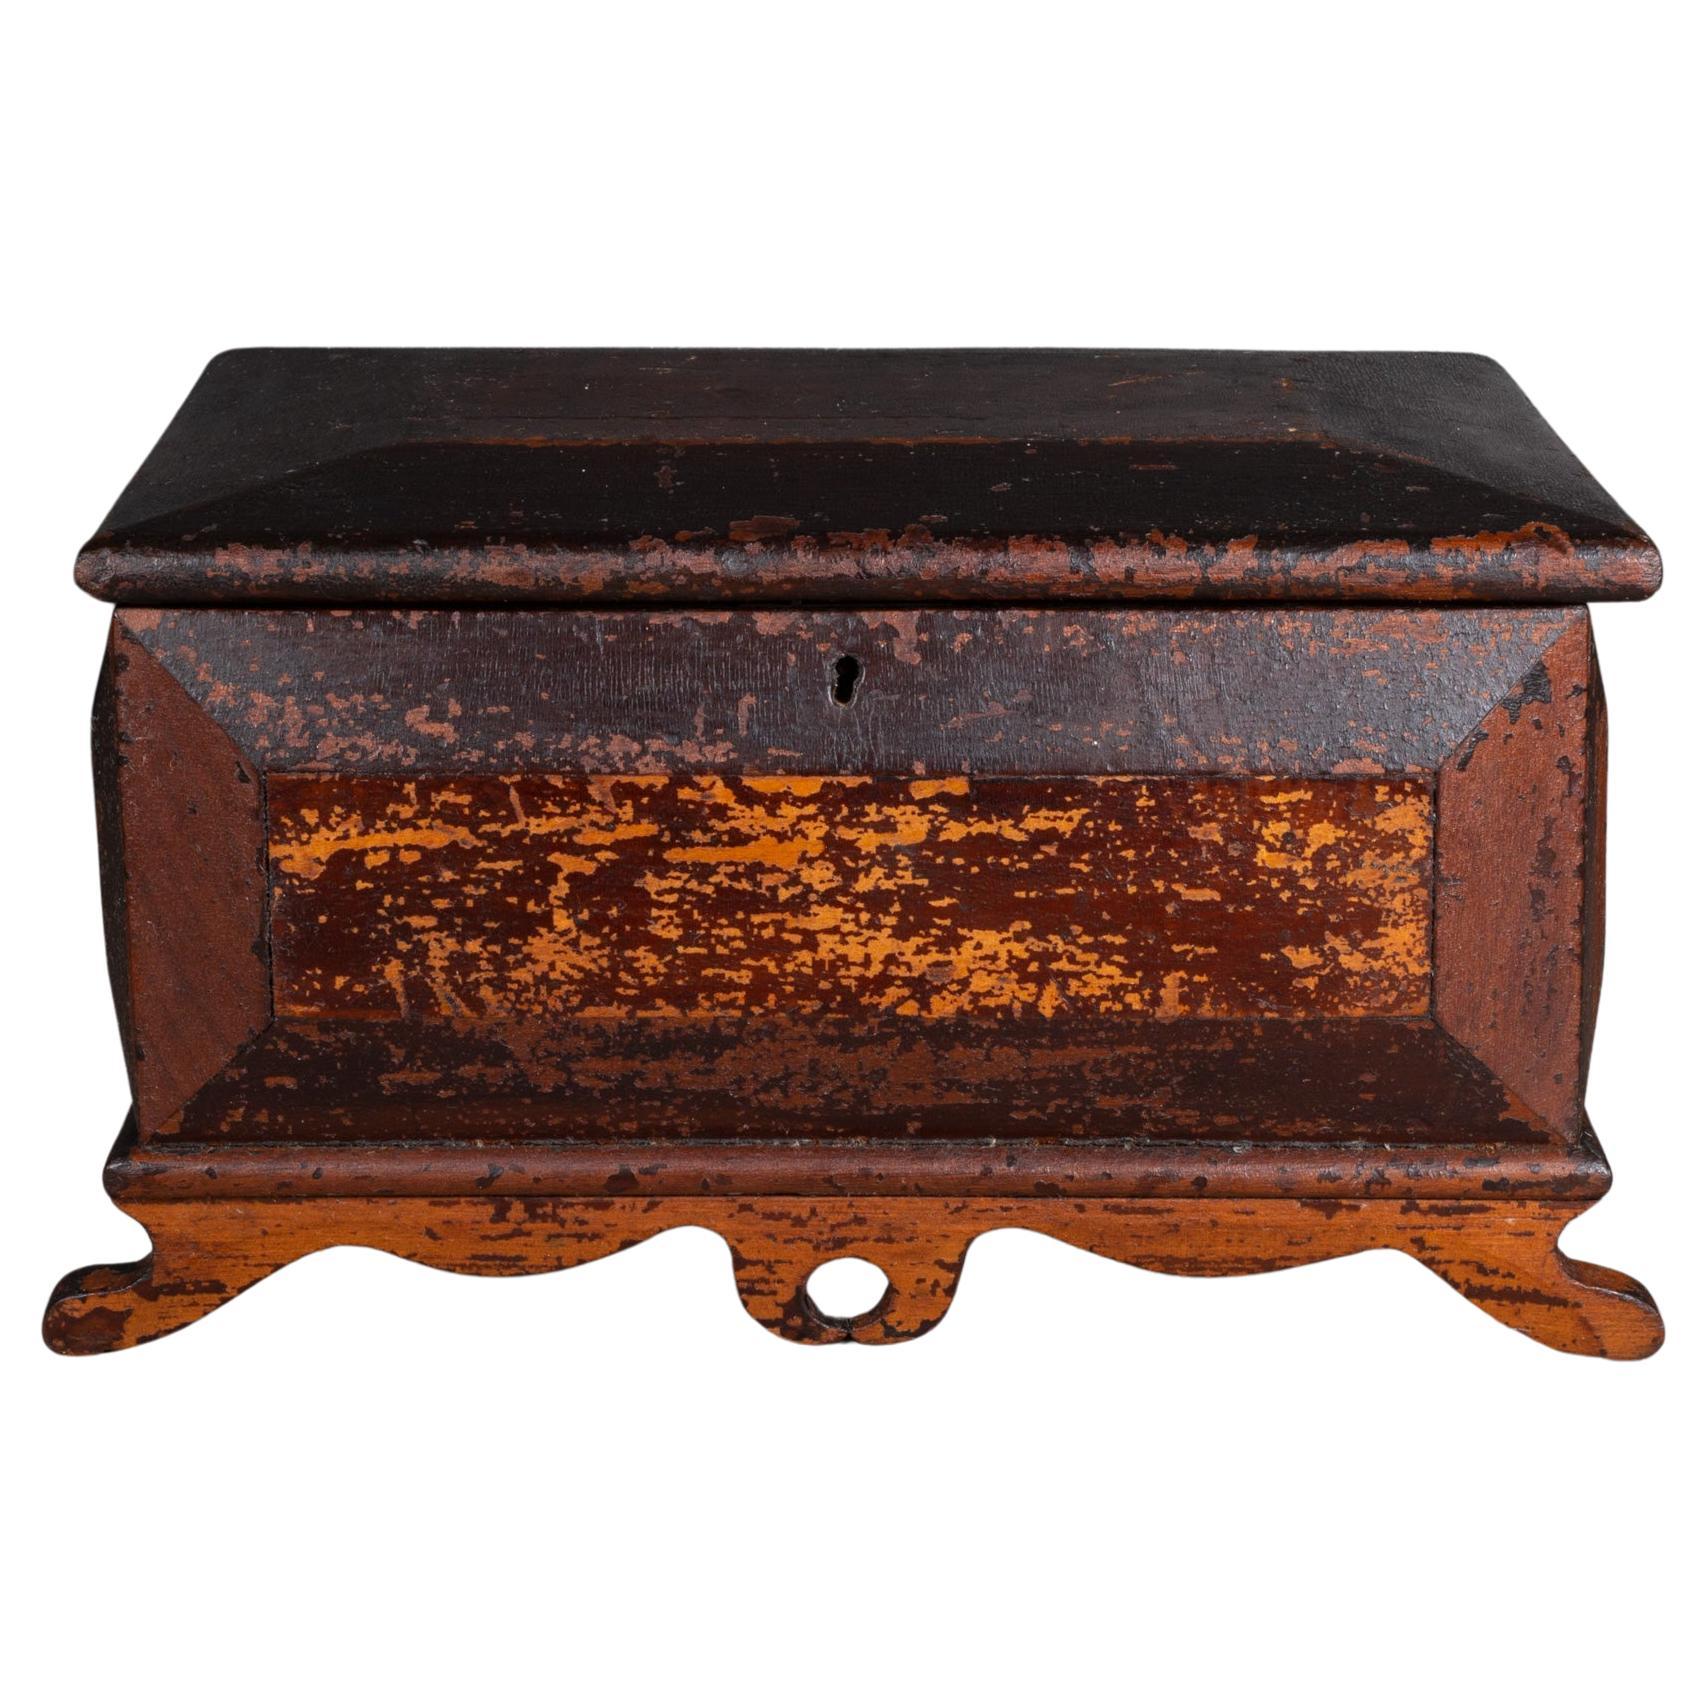 19th c. Distressed Scroll-Footed Box For Sale